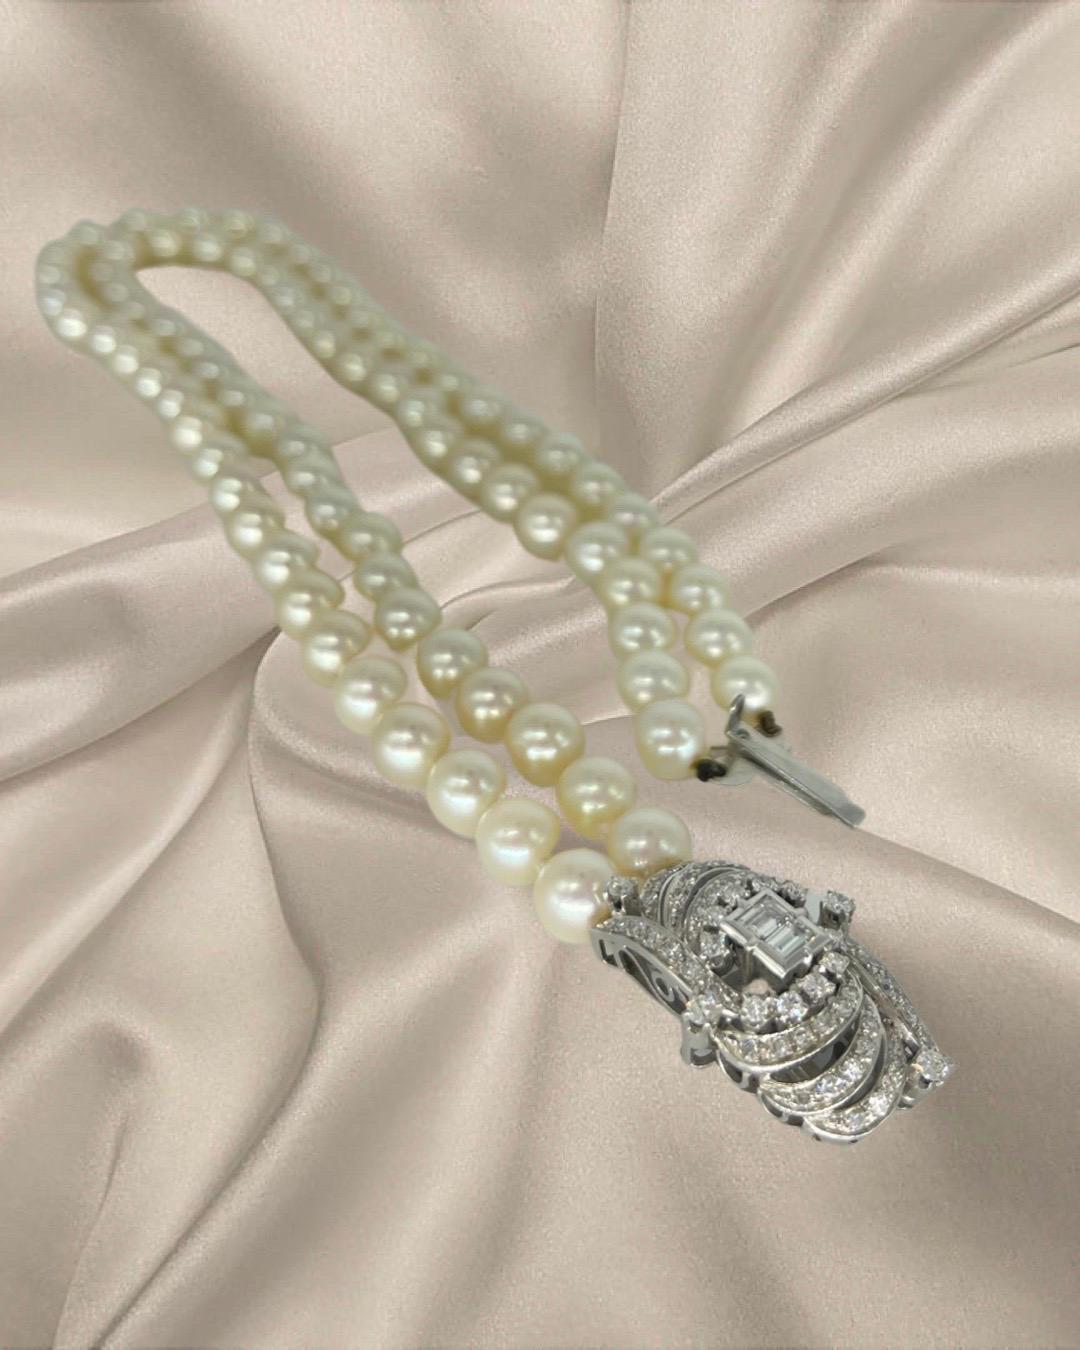 Antique 5.00 Carat Diamonds and Pearls Choker Necklace 18k White Gold In Excellent Condition For Sale In Miami, FL